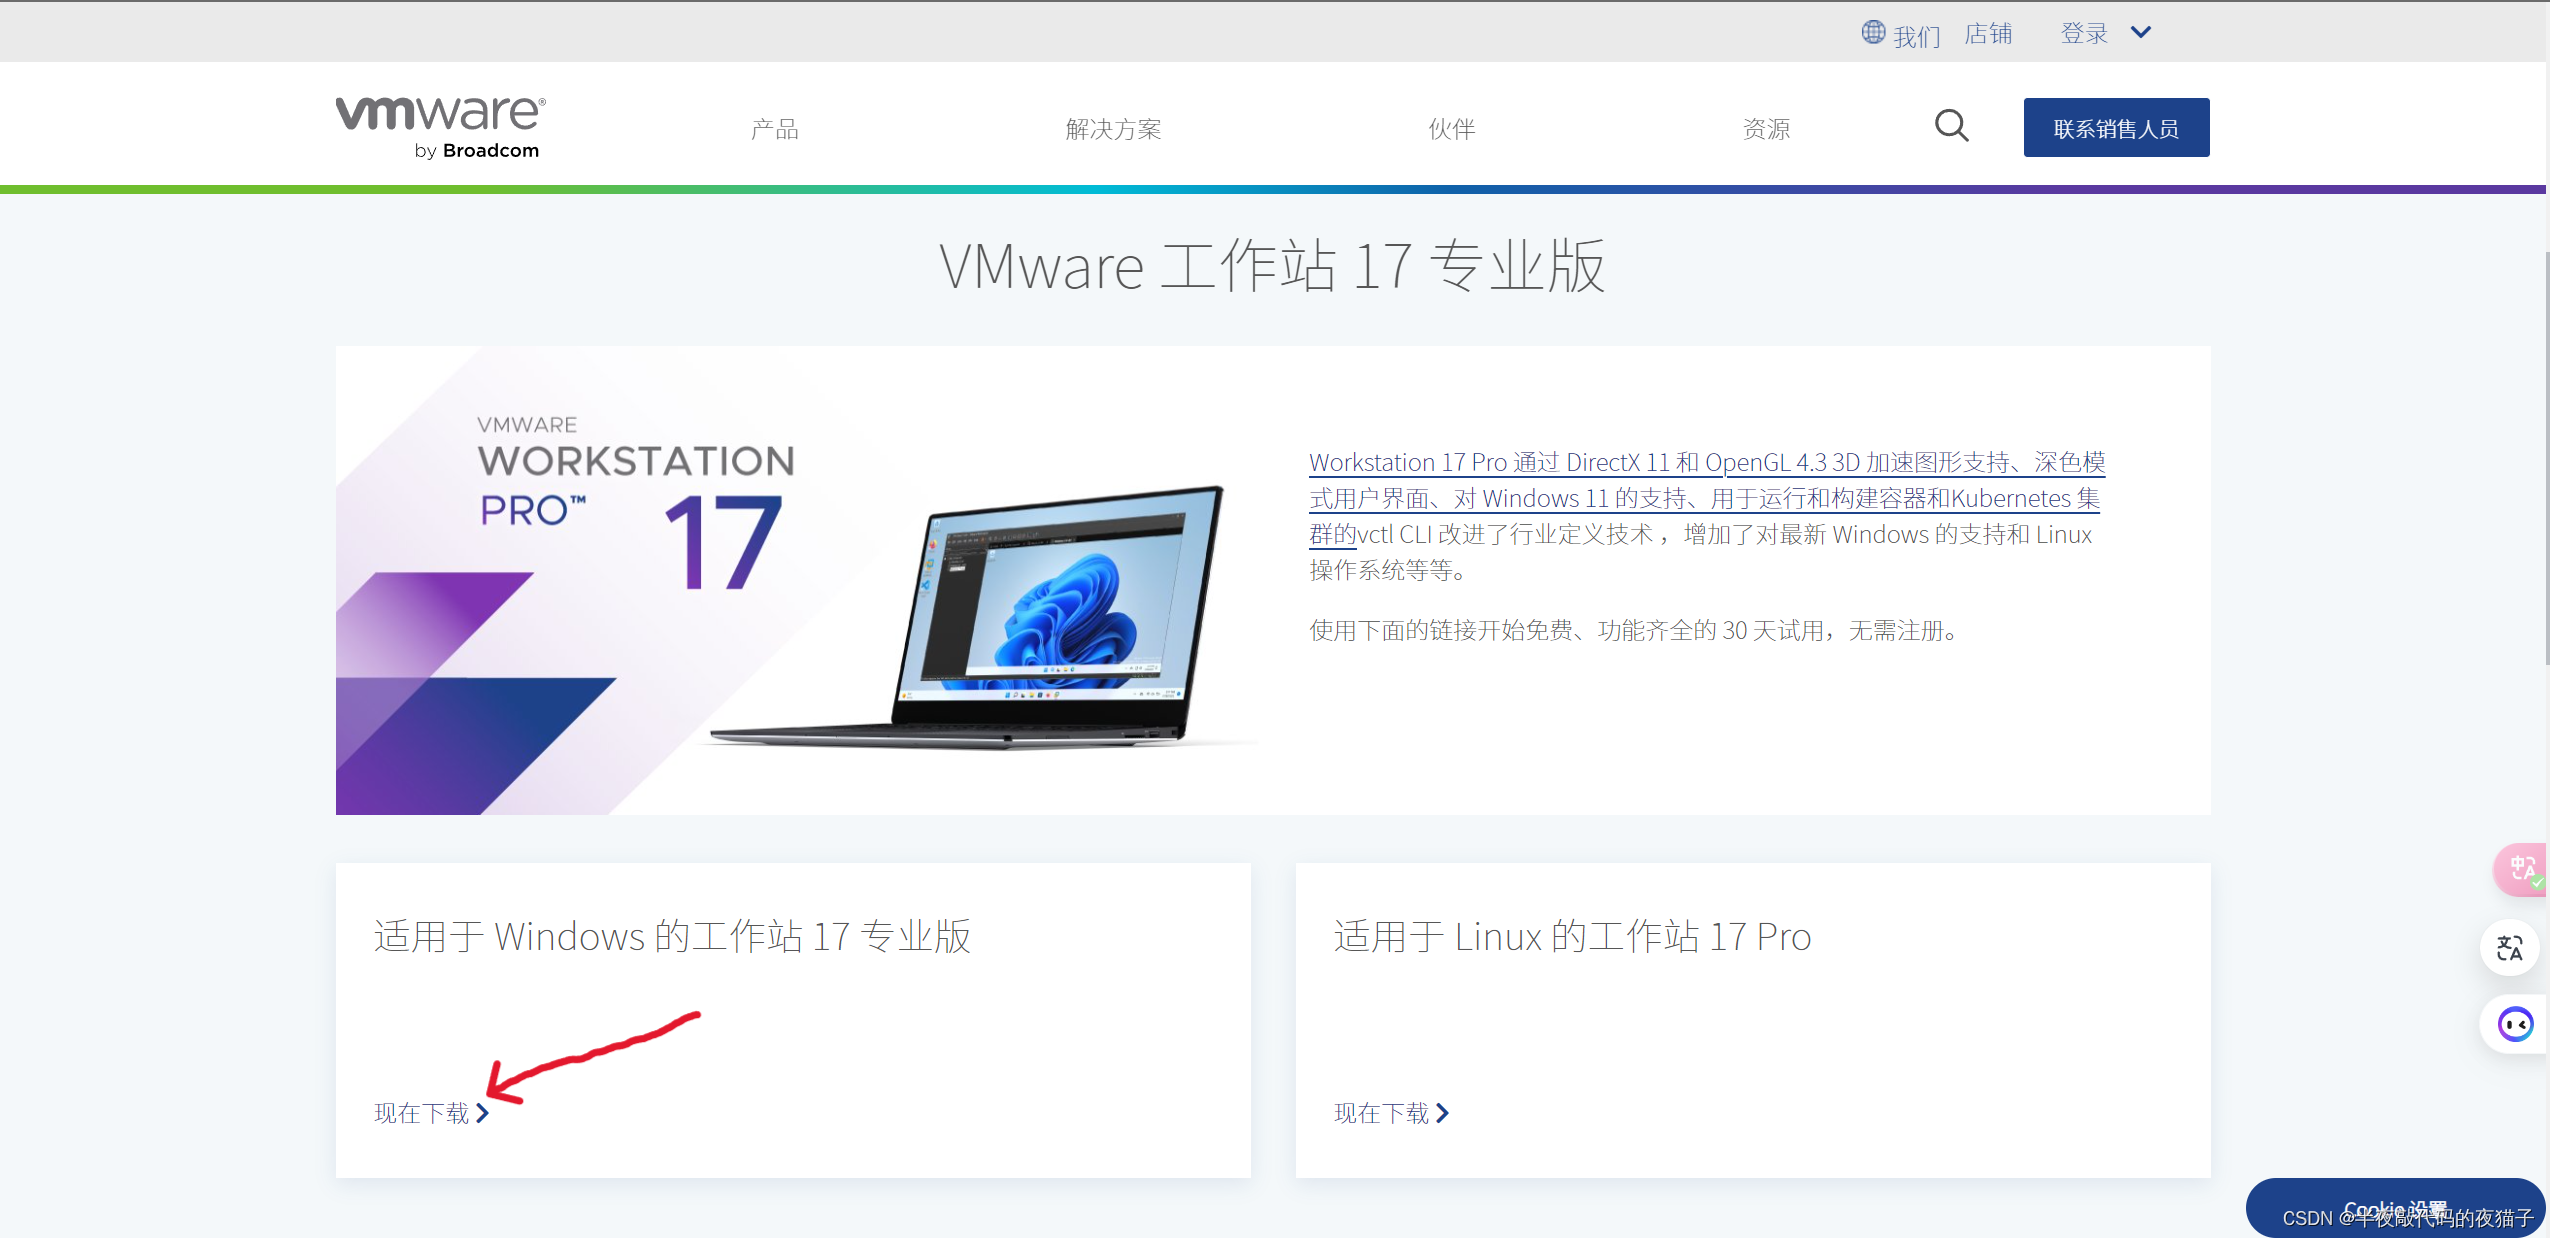 vmware-17虚拟机<span style='color:red;'>安装</span>教程及版本<span style='color:red;'>密</span><span style='color:red;'>钥</span>（<span style='color:red;'>保姆</span>级，包含图文讲解，不需注册账户）